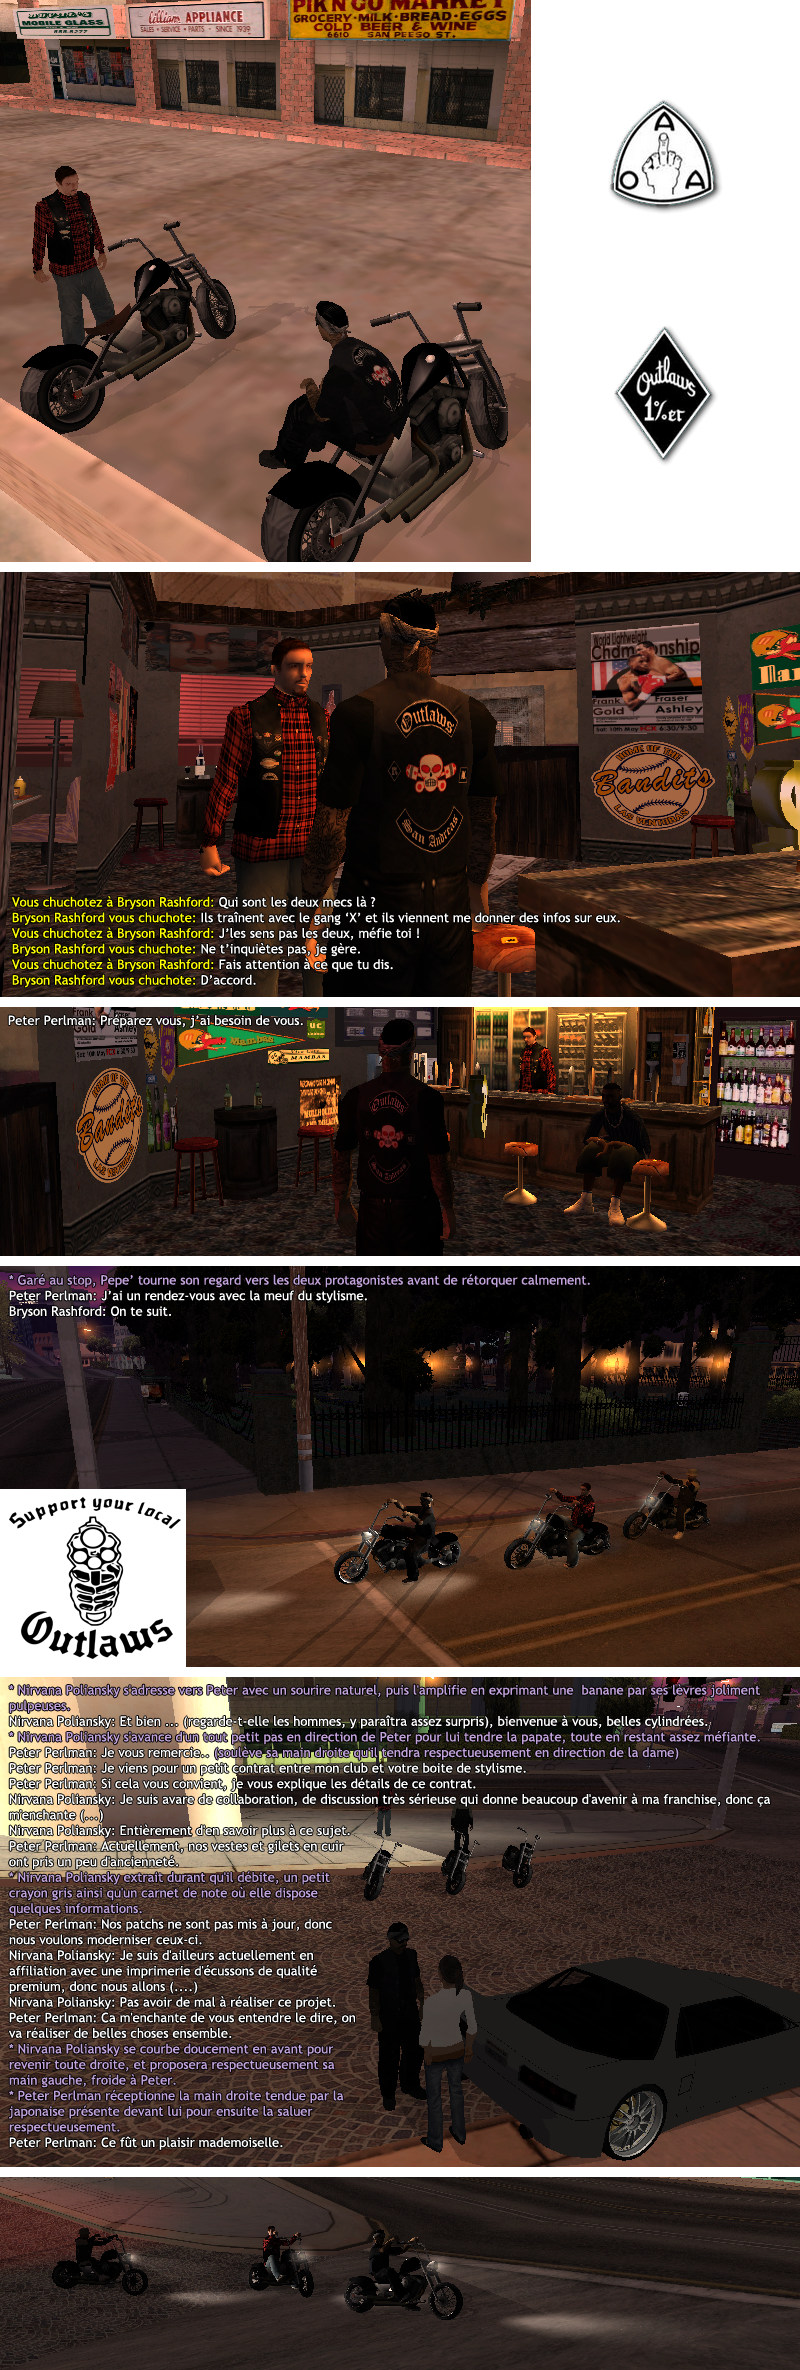 (BIKER) (PED) Outlaws Motorcycle Club 1% - Page 4 Mlrd